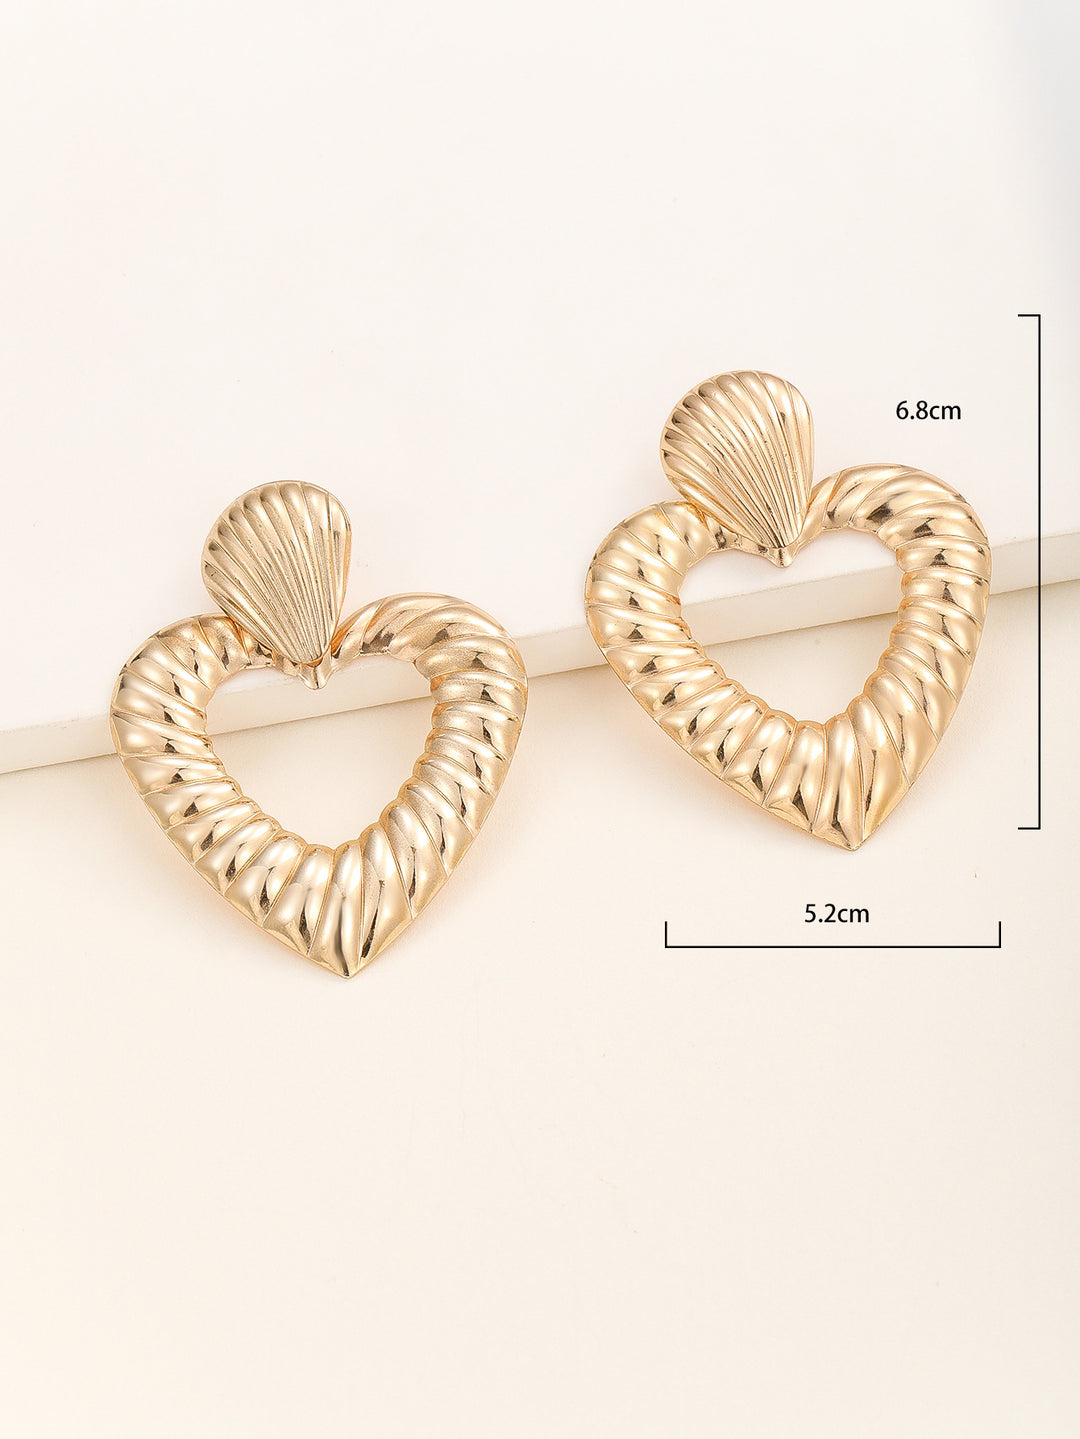 Exaggerated Hollow Out Big Love Heart Earrings For Women Vintage Metal Gold Color Geometric Hoop Earrings Gift